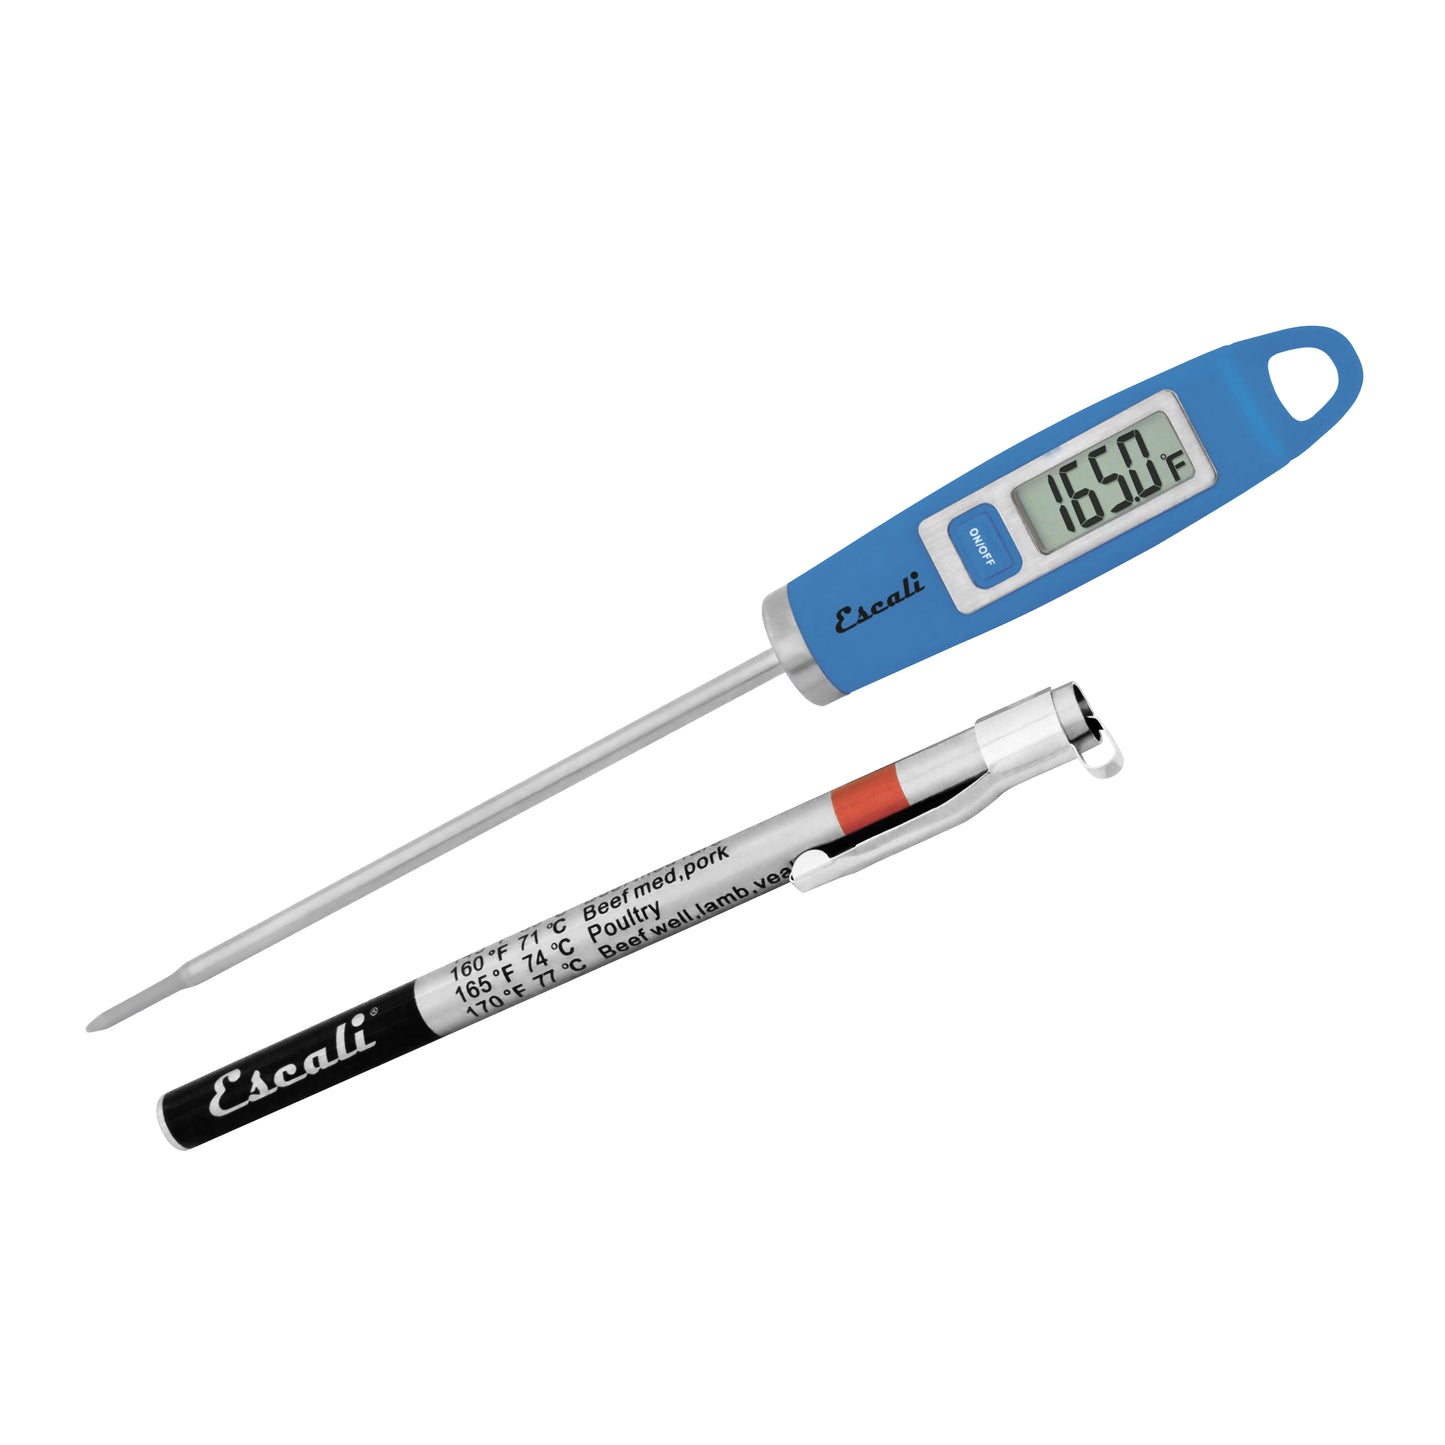 A photo of a blue DH1 Gourmet Digital Thermometer on a white background